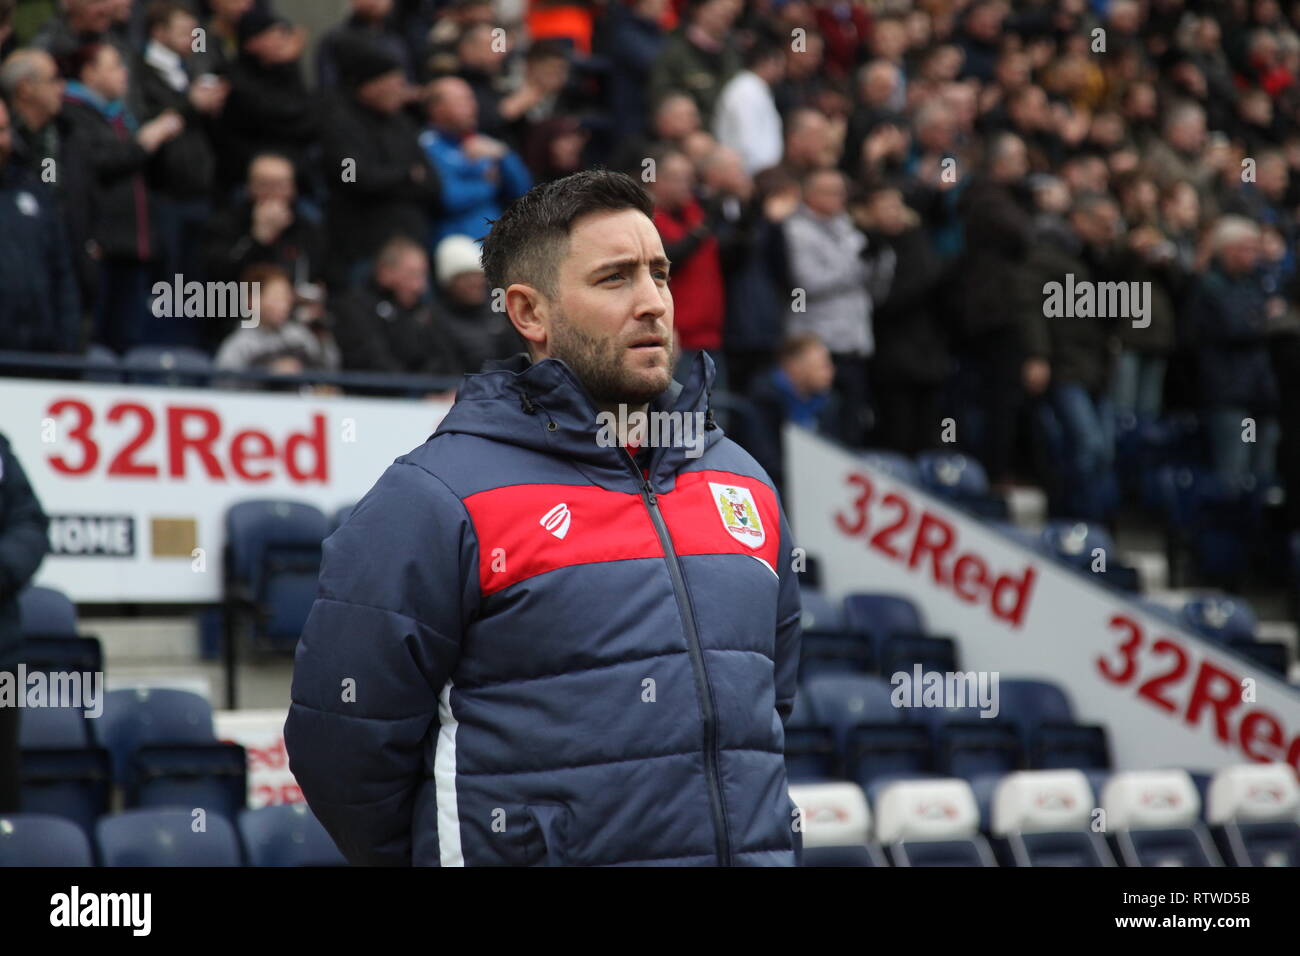 Preston, Lancashire, UK. Bristol City manager Lee Johnson in the dugout ahead of the Championship game between Preston North End and Bristol City at Deepdale which ended in a 1-1 draw. Stock Photo